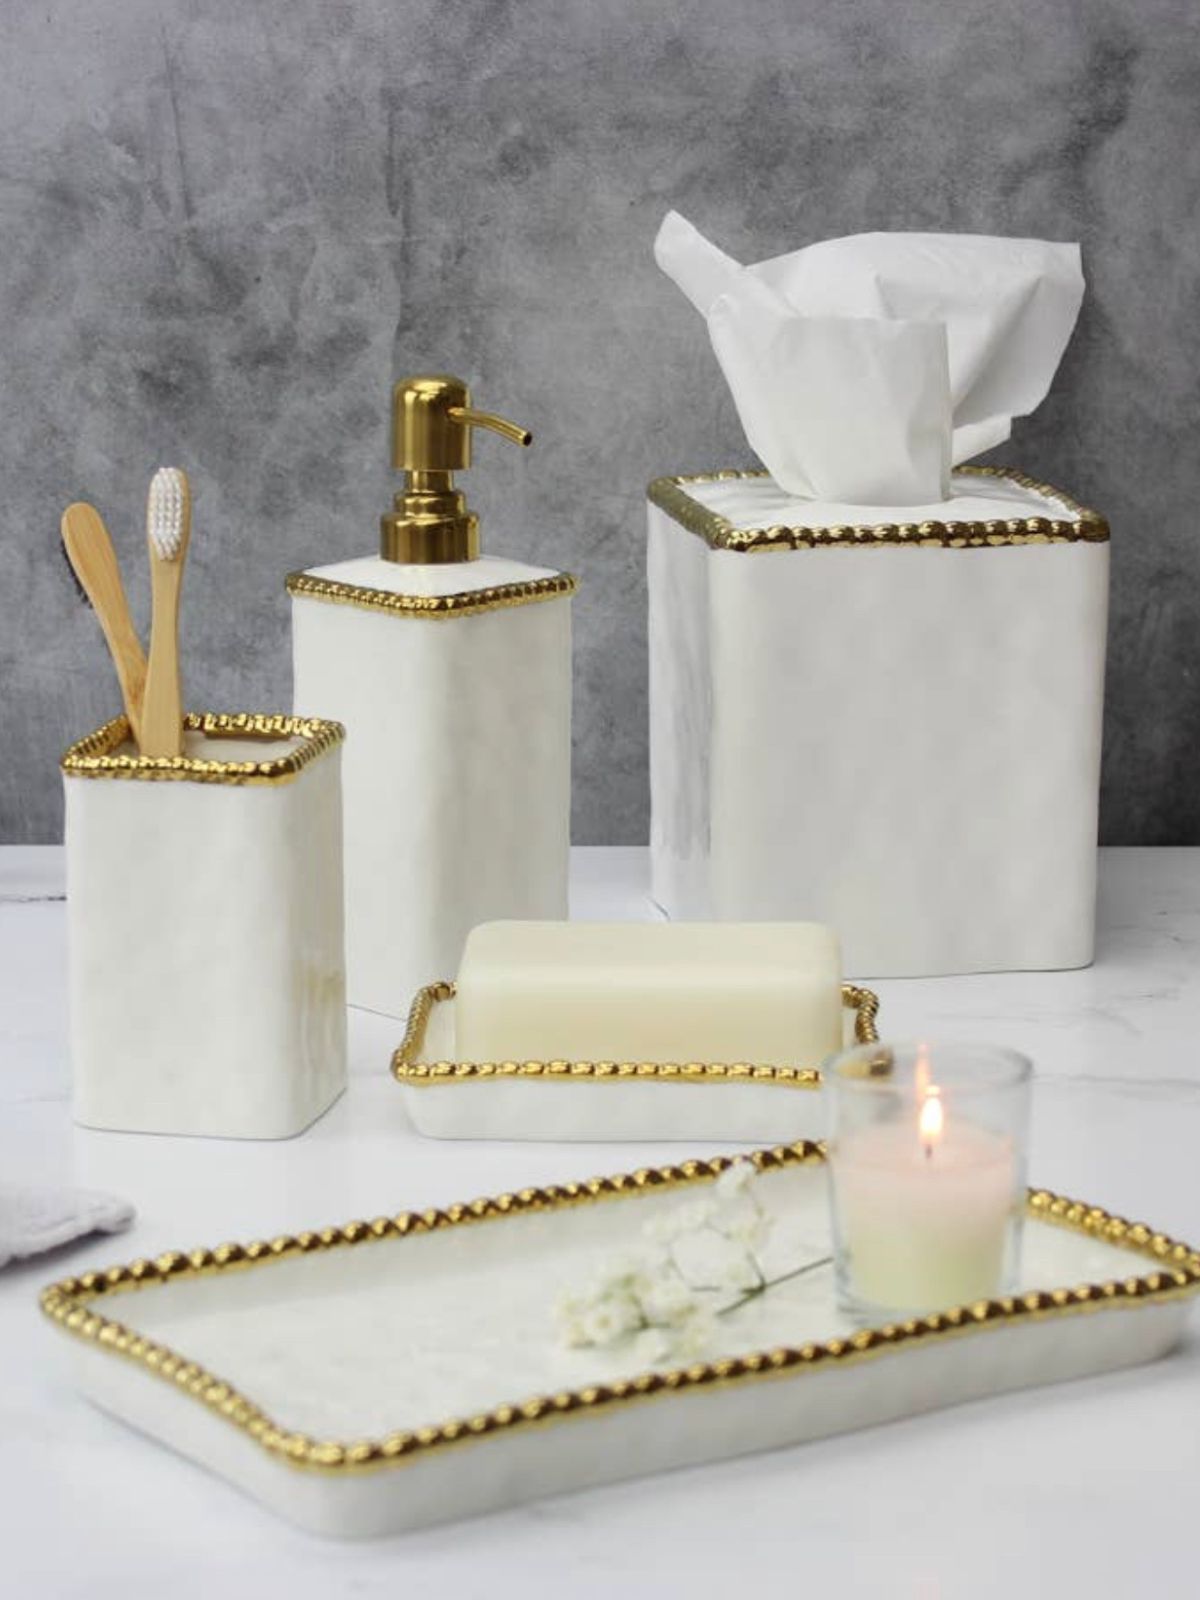 White Porcelain Square Tissue Box with Gold Titanium Beaded Edges, Luxurious Bathroom Accessories sold by KYA Home Decor.